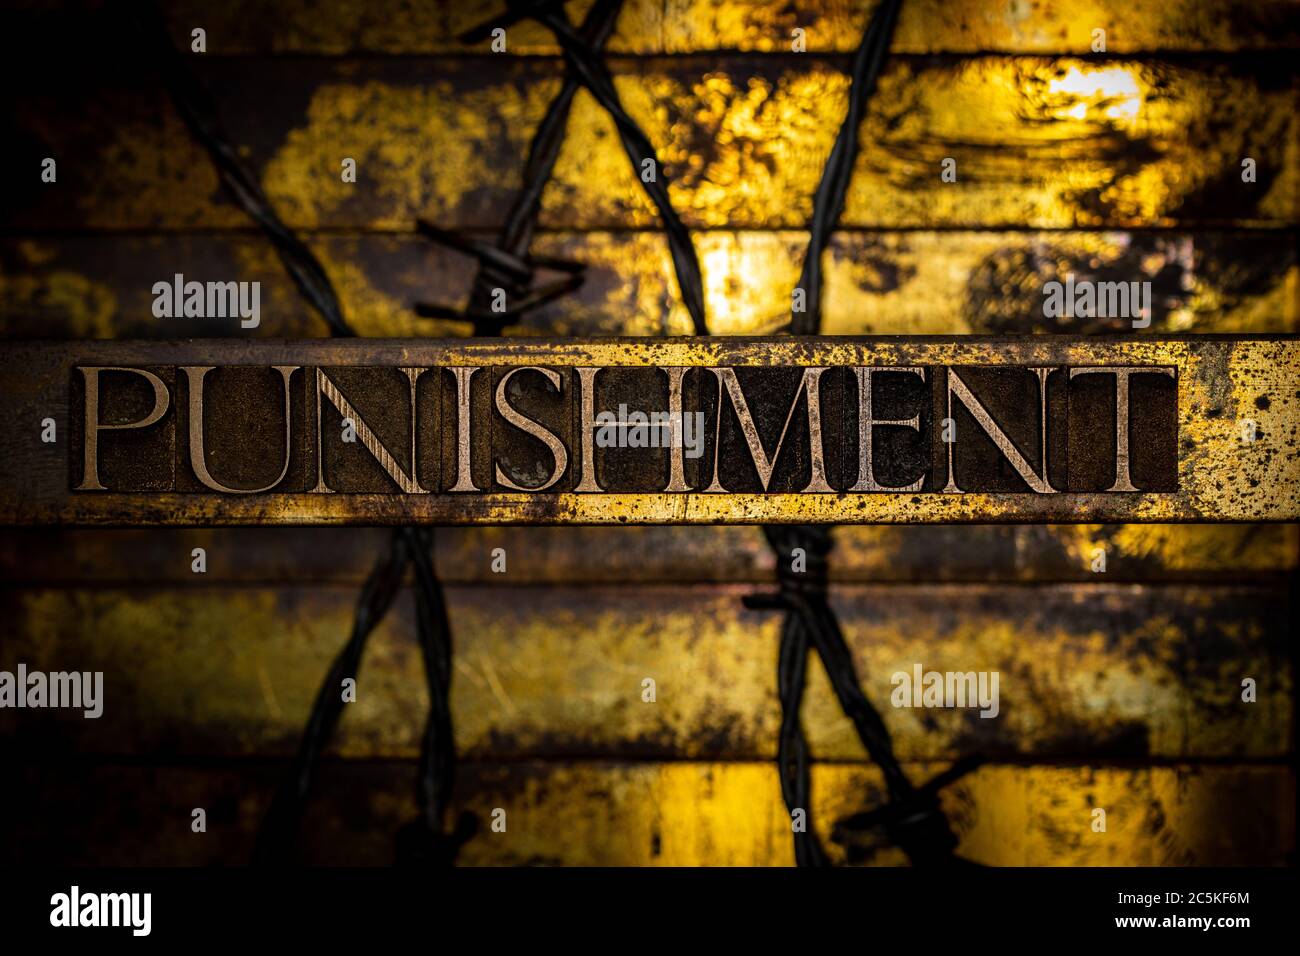 Punishment text formed with real authentic typeset letters on vintage textured silver grunge copper and gold background Stock Photo